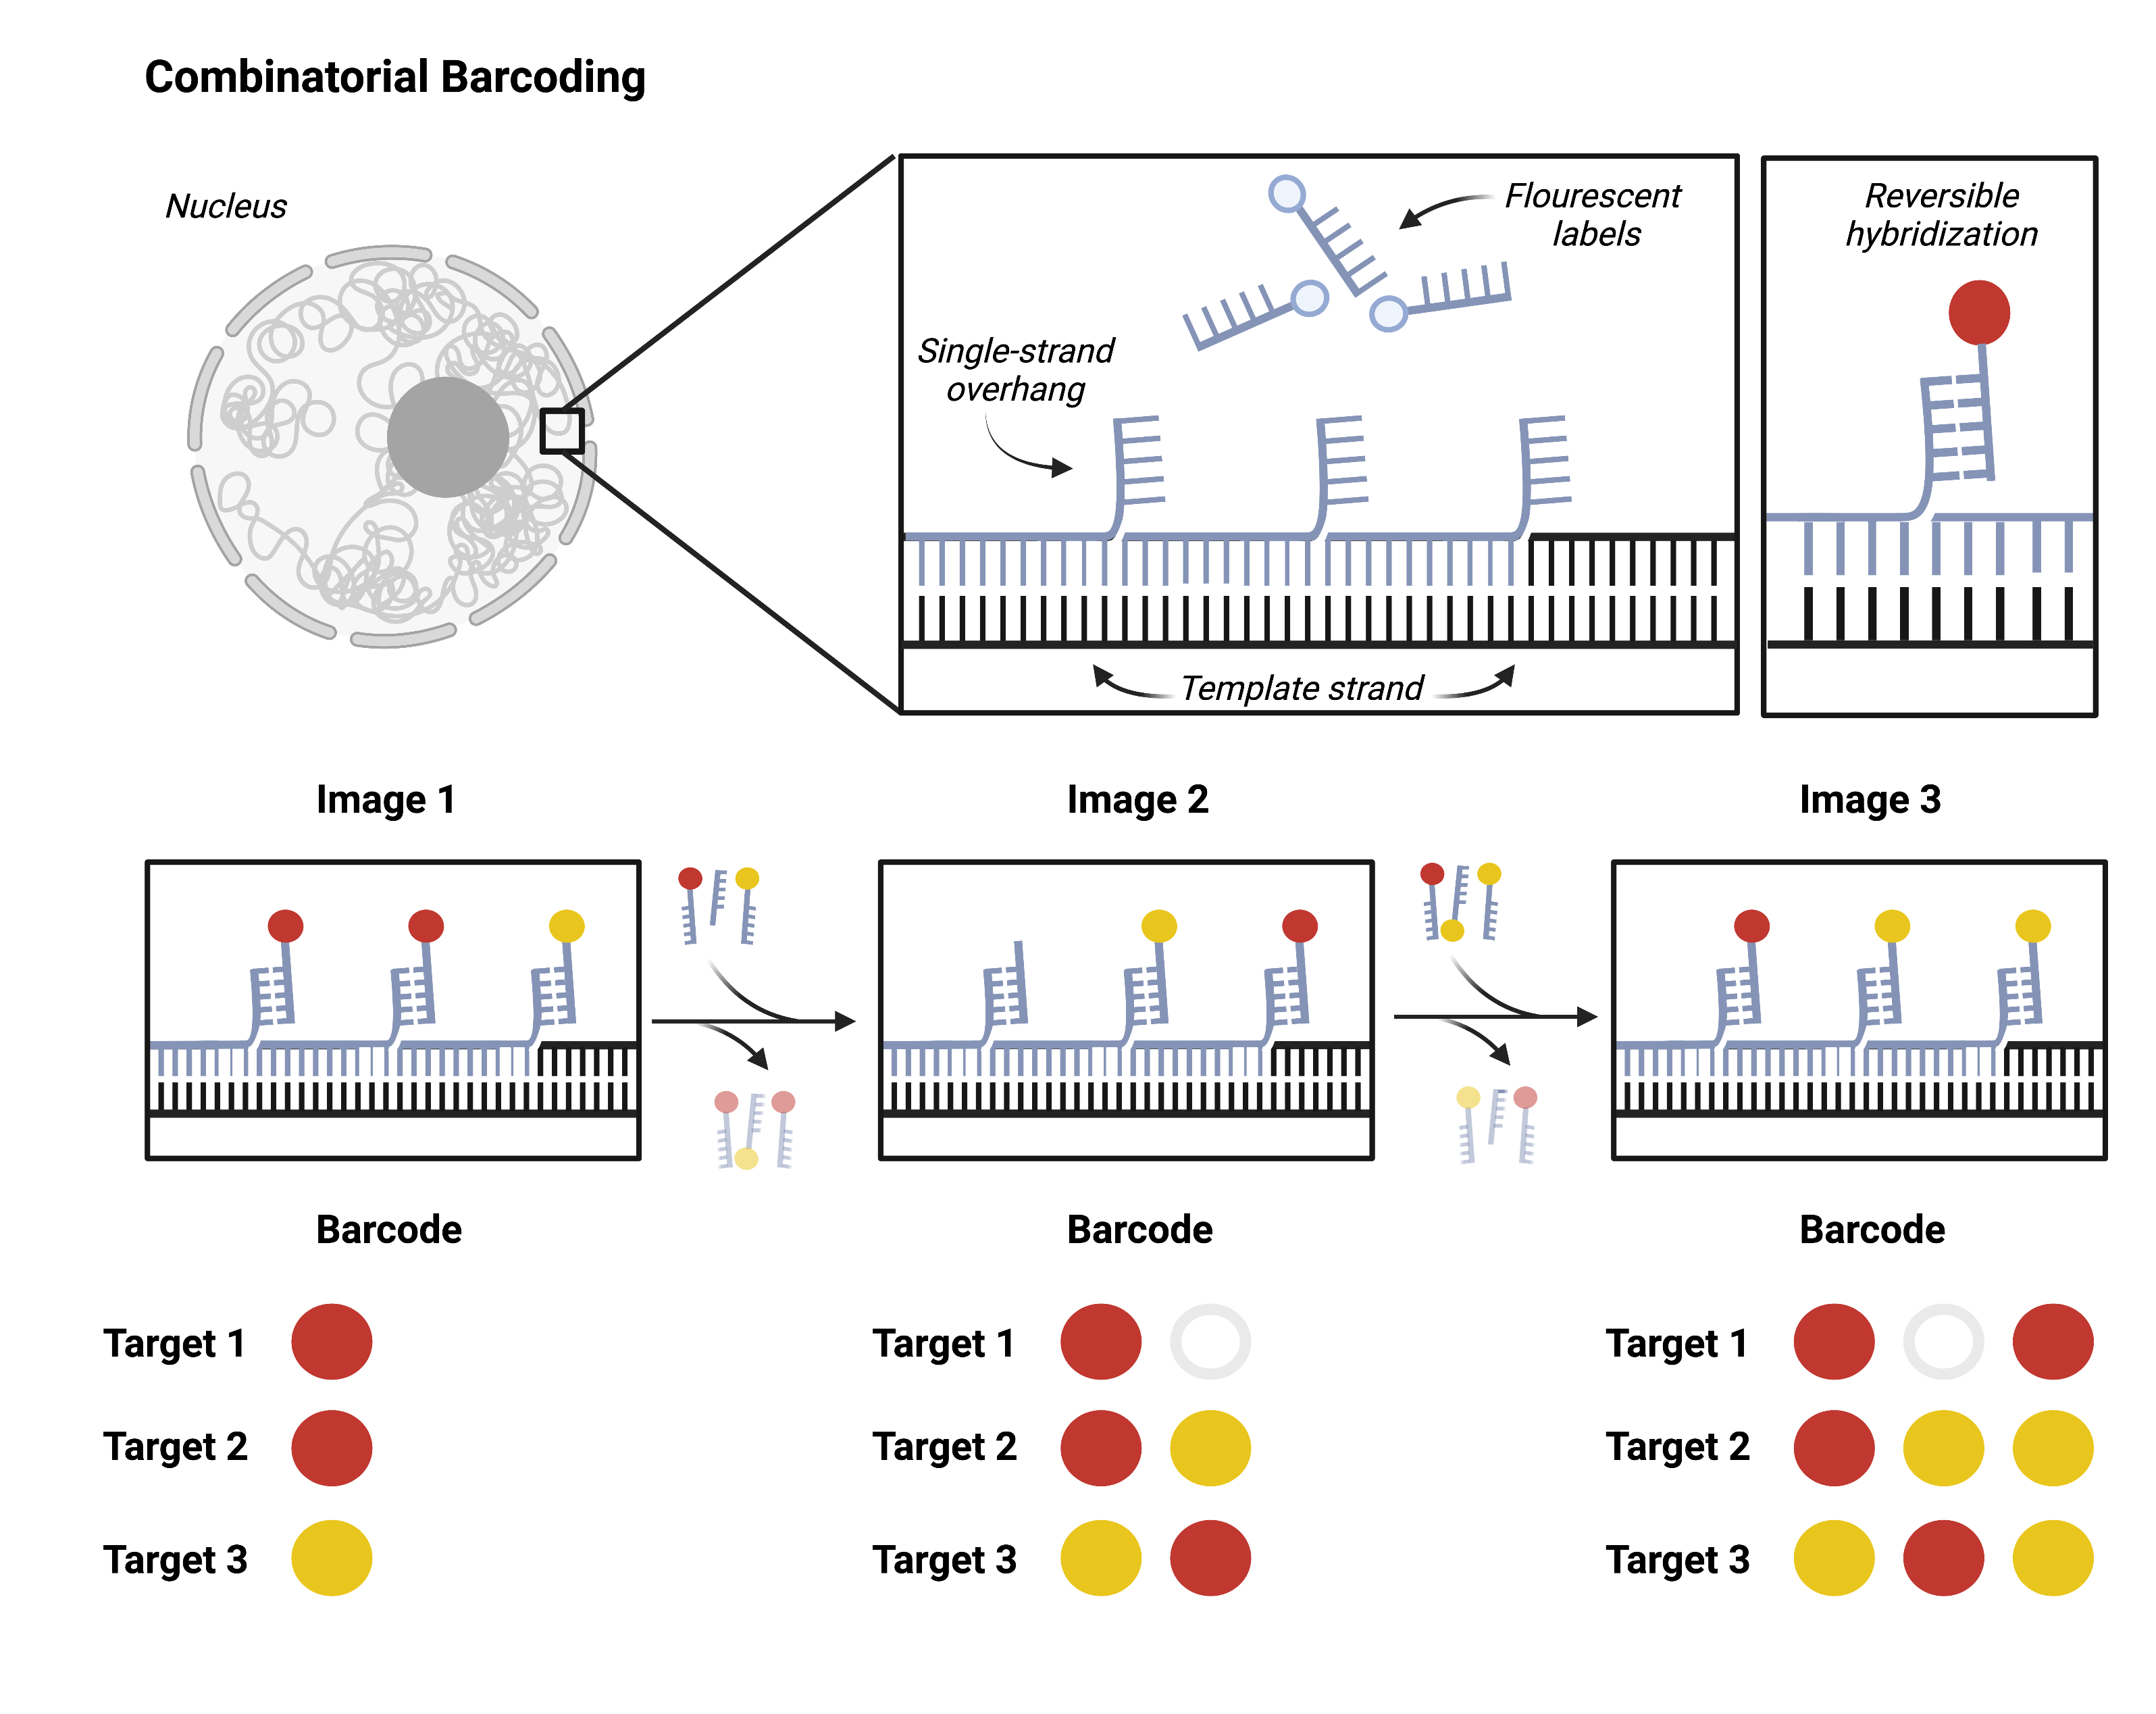 Combinatorial barcoding for high-throughput spatial genomics. This figure demonstrates the concept by showing oligonucleotide probes hybridized with target DNA. The oligo probes have single-strand overhangs. Those overhangs serve as the target for a second oligonucleotide probe, this one conjugated with a fluorescent marker. Successive rounds of targeting fluorescent tagged markers to the single-strand overhanges then allows the same position to be targeted multiple times with different colors over time. The combination of colors forms a unique barcode and can be used to identify which genetic loci is being observed in 3D space. 